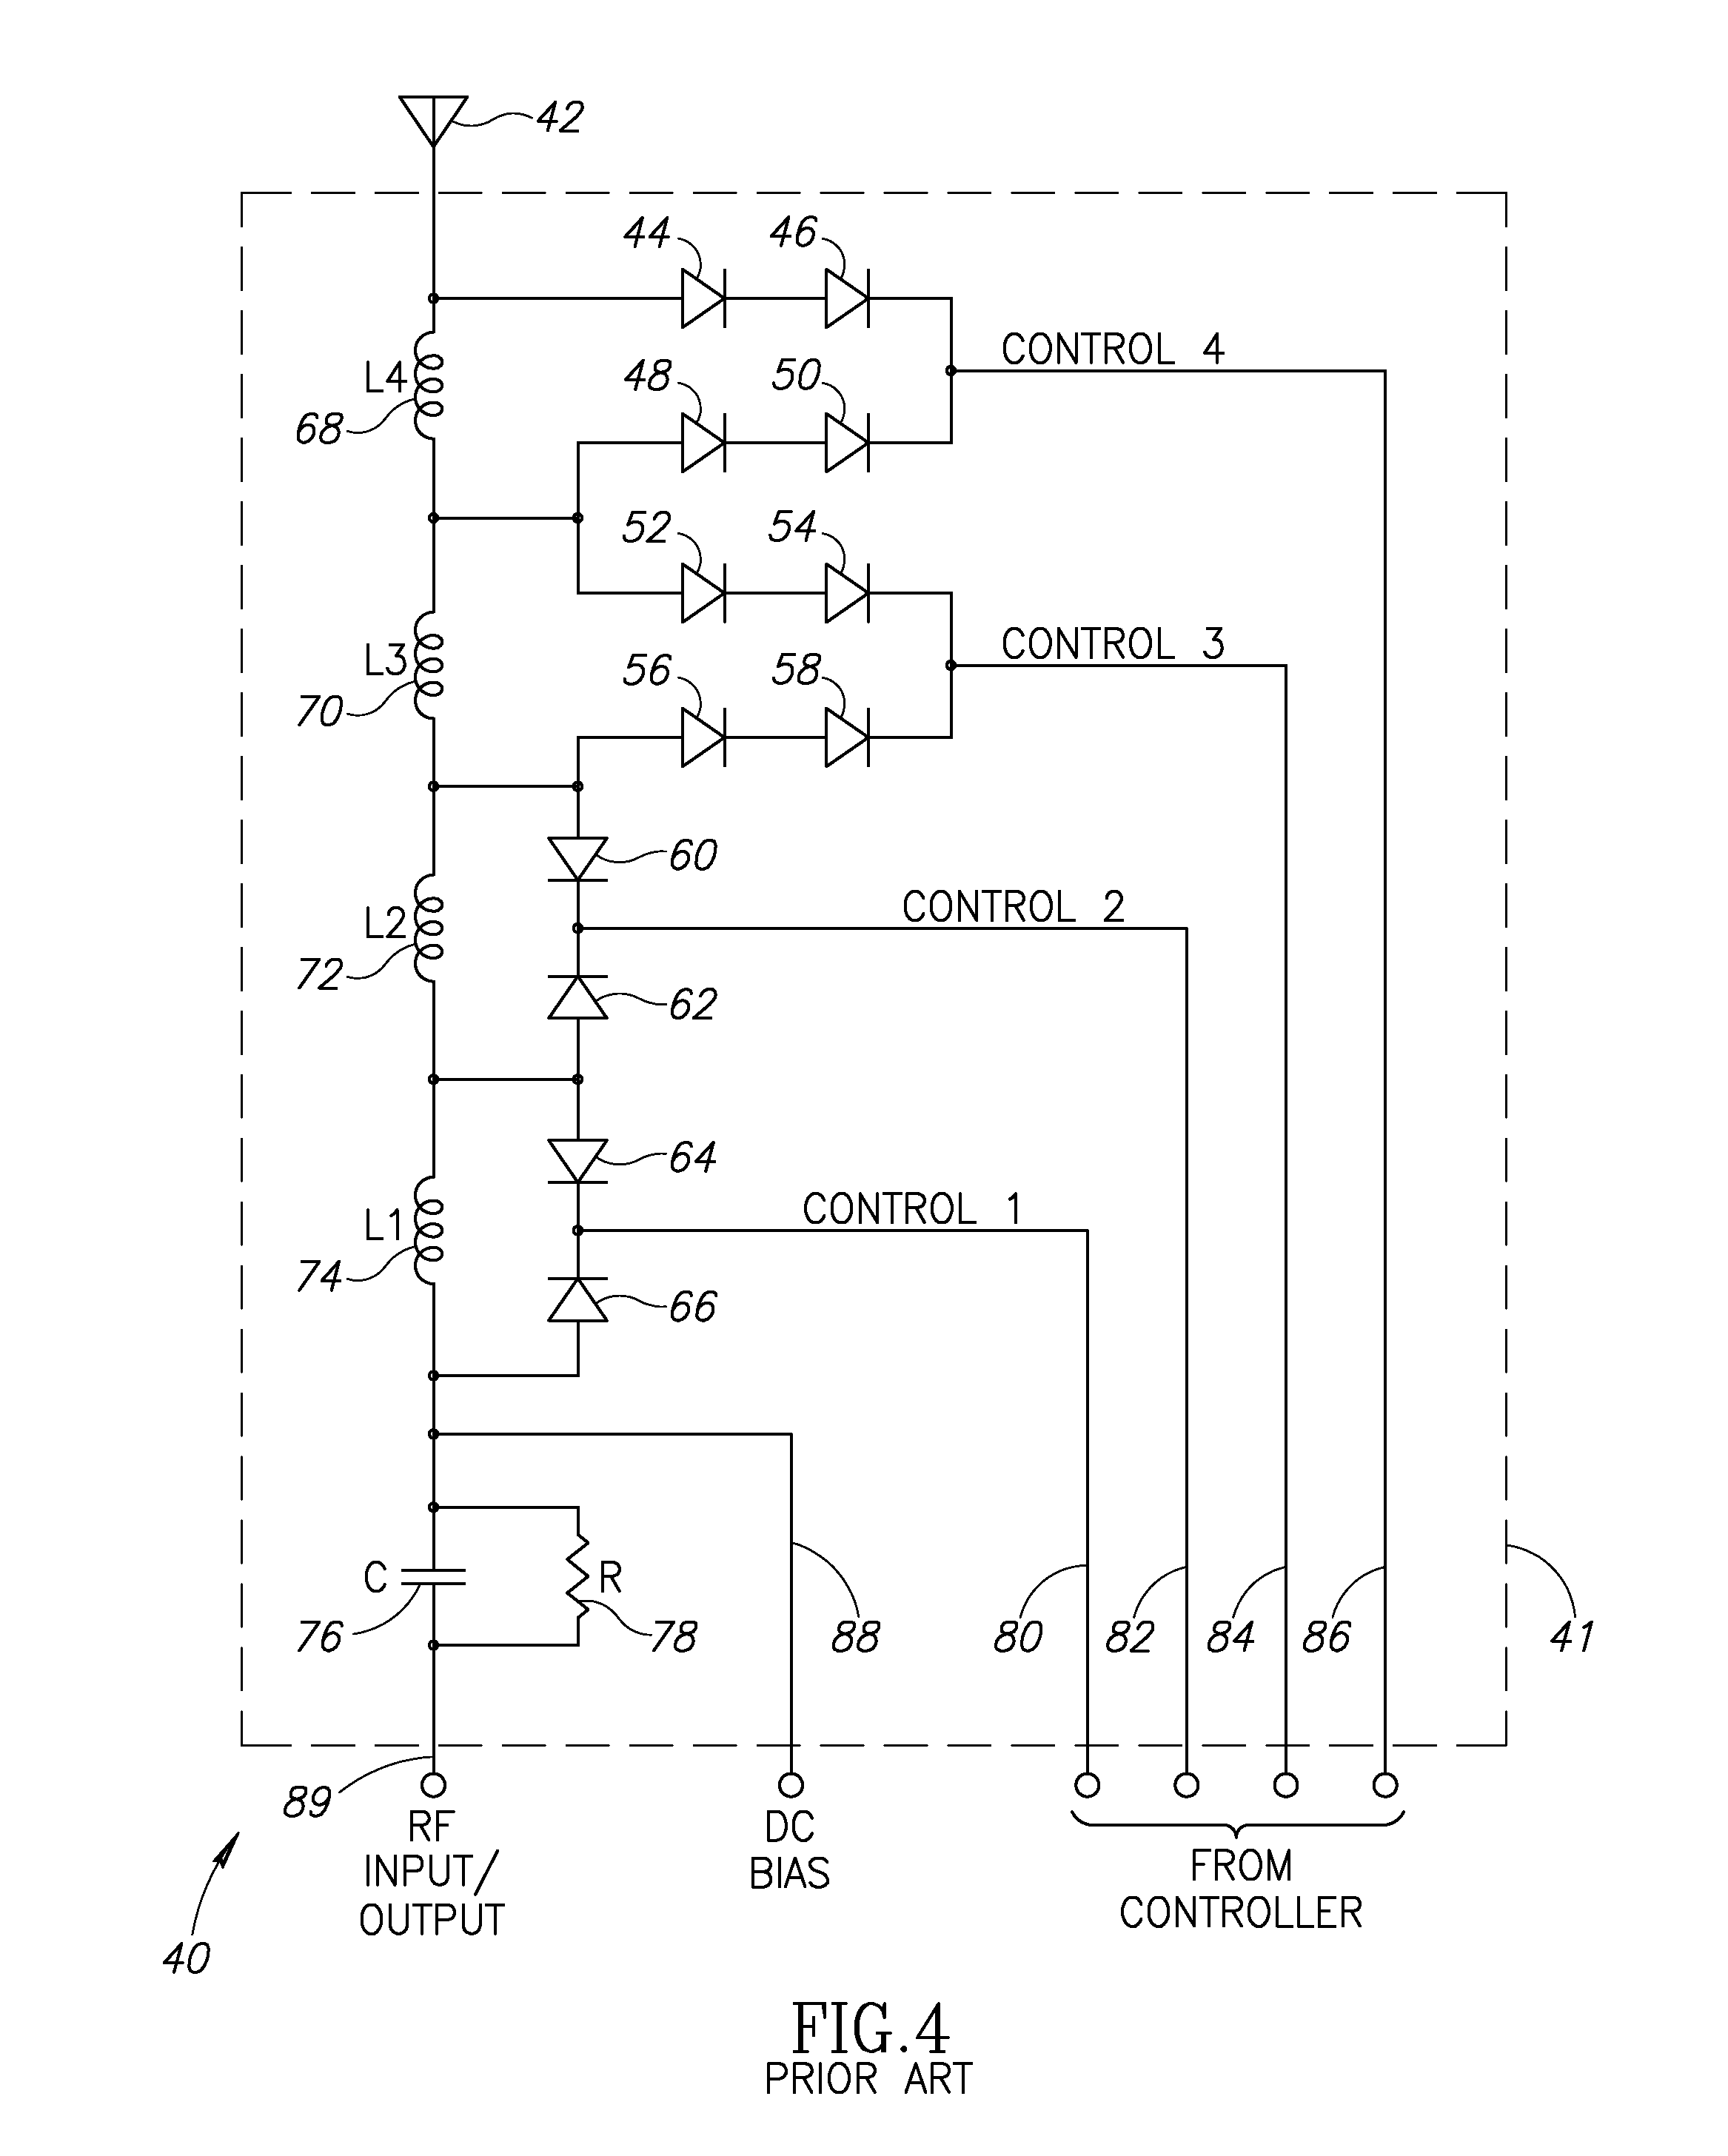 Digitally controlled antenna tuning circuit for radio frequency receivers